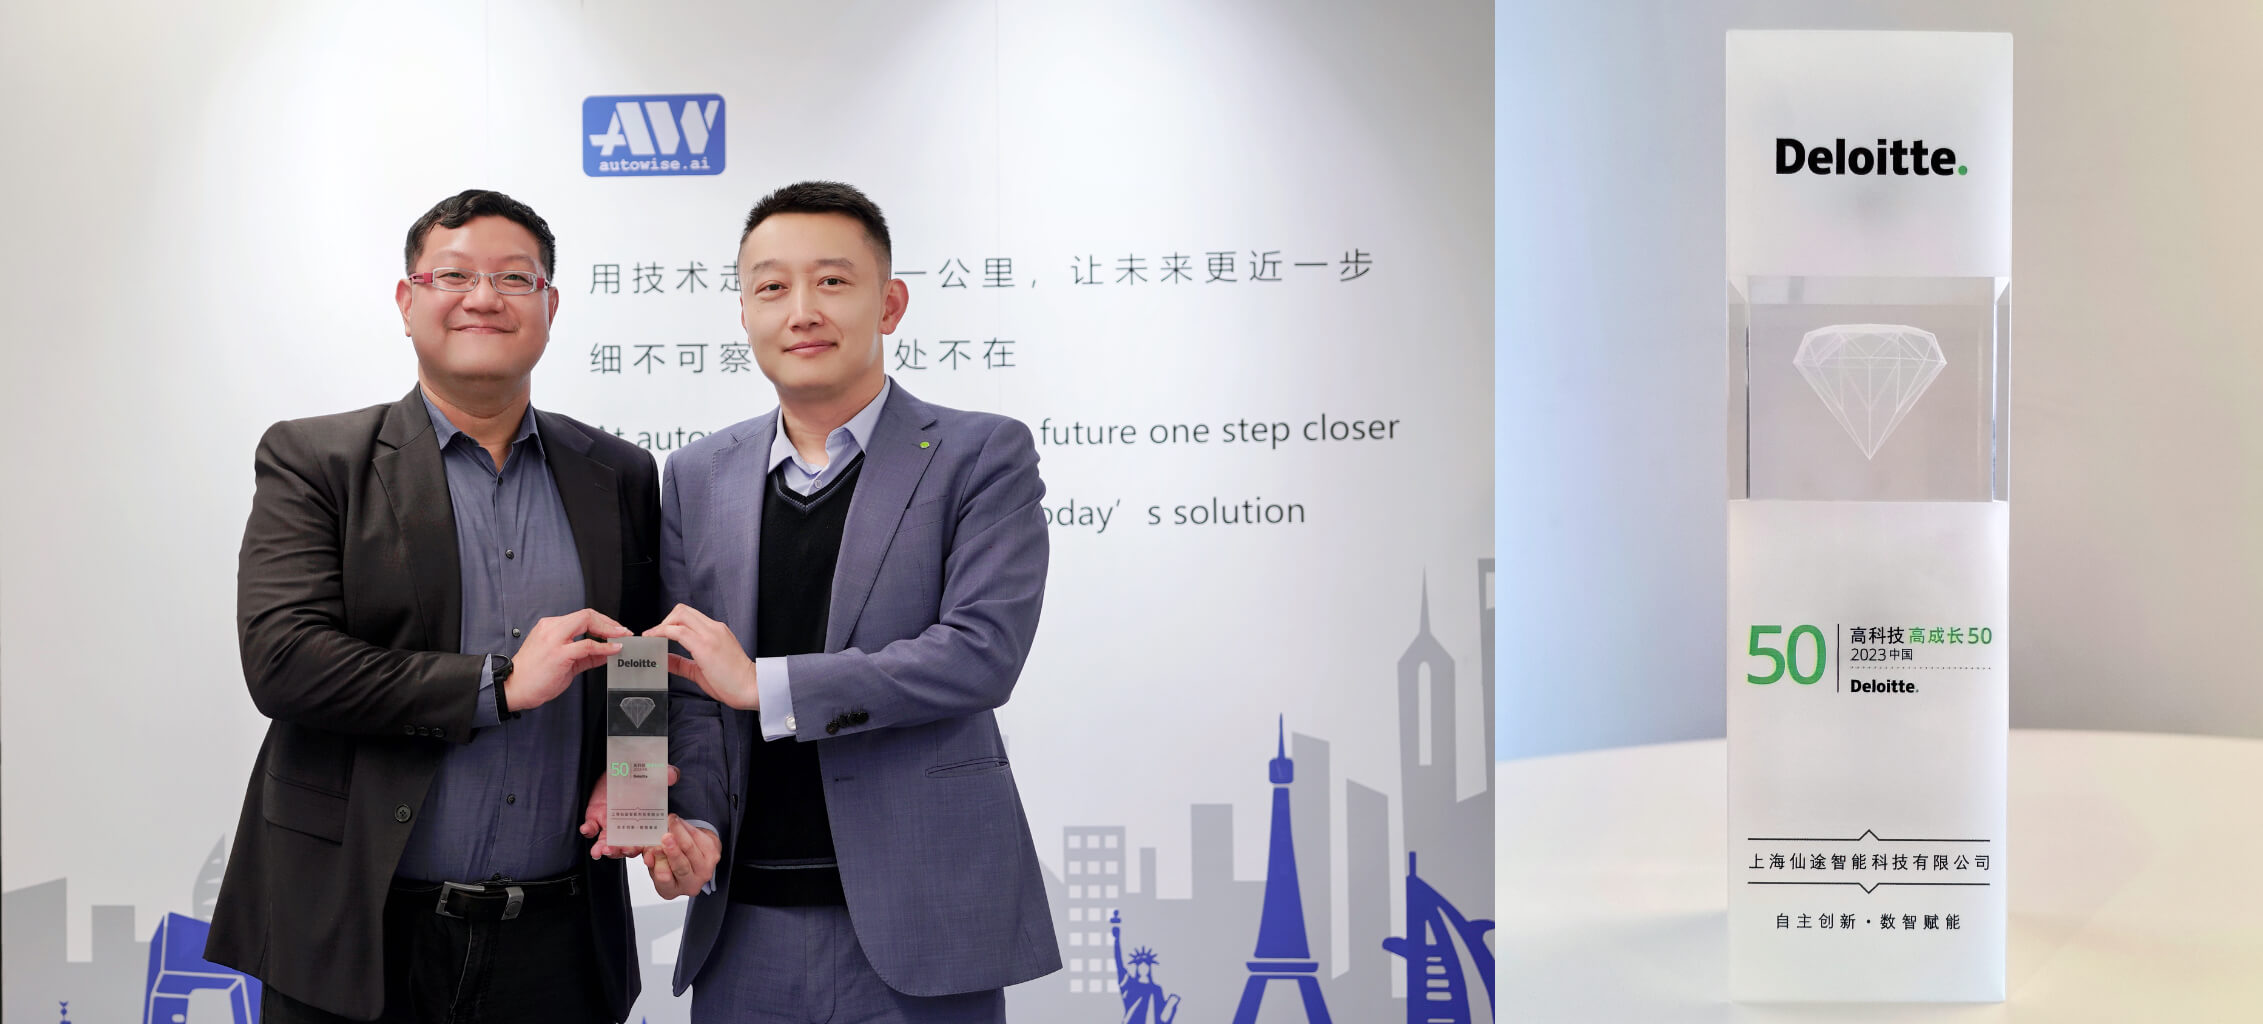 Autowise.ai earns place in prestigious Deloitte China Top 50 list for 2023